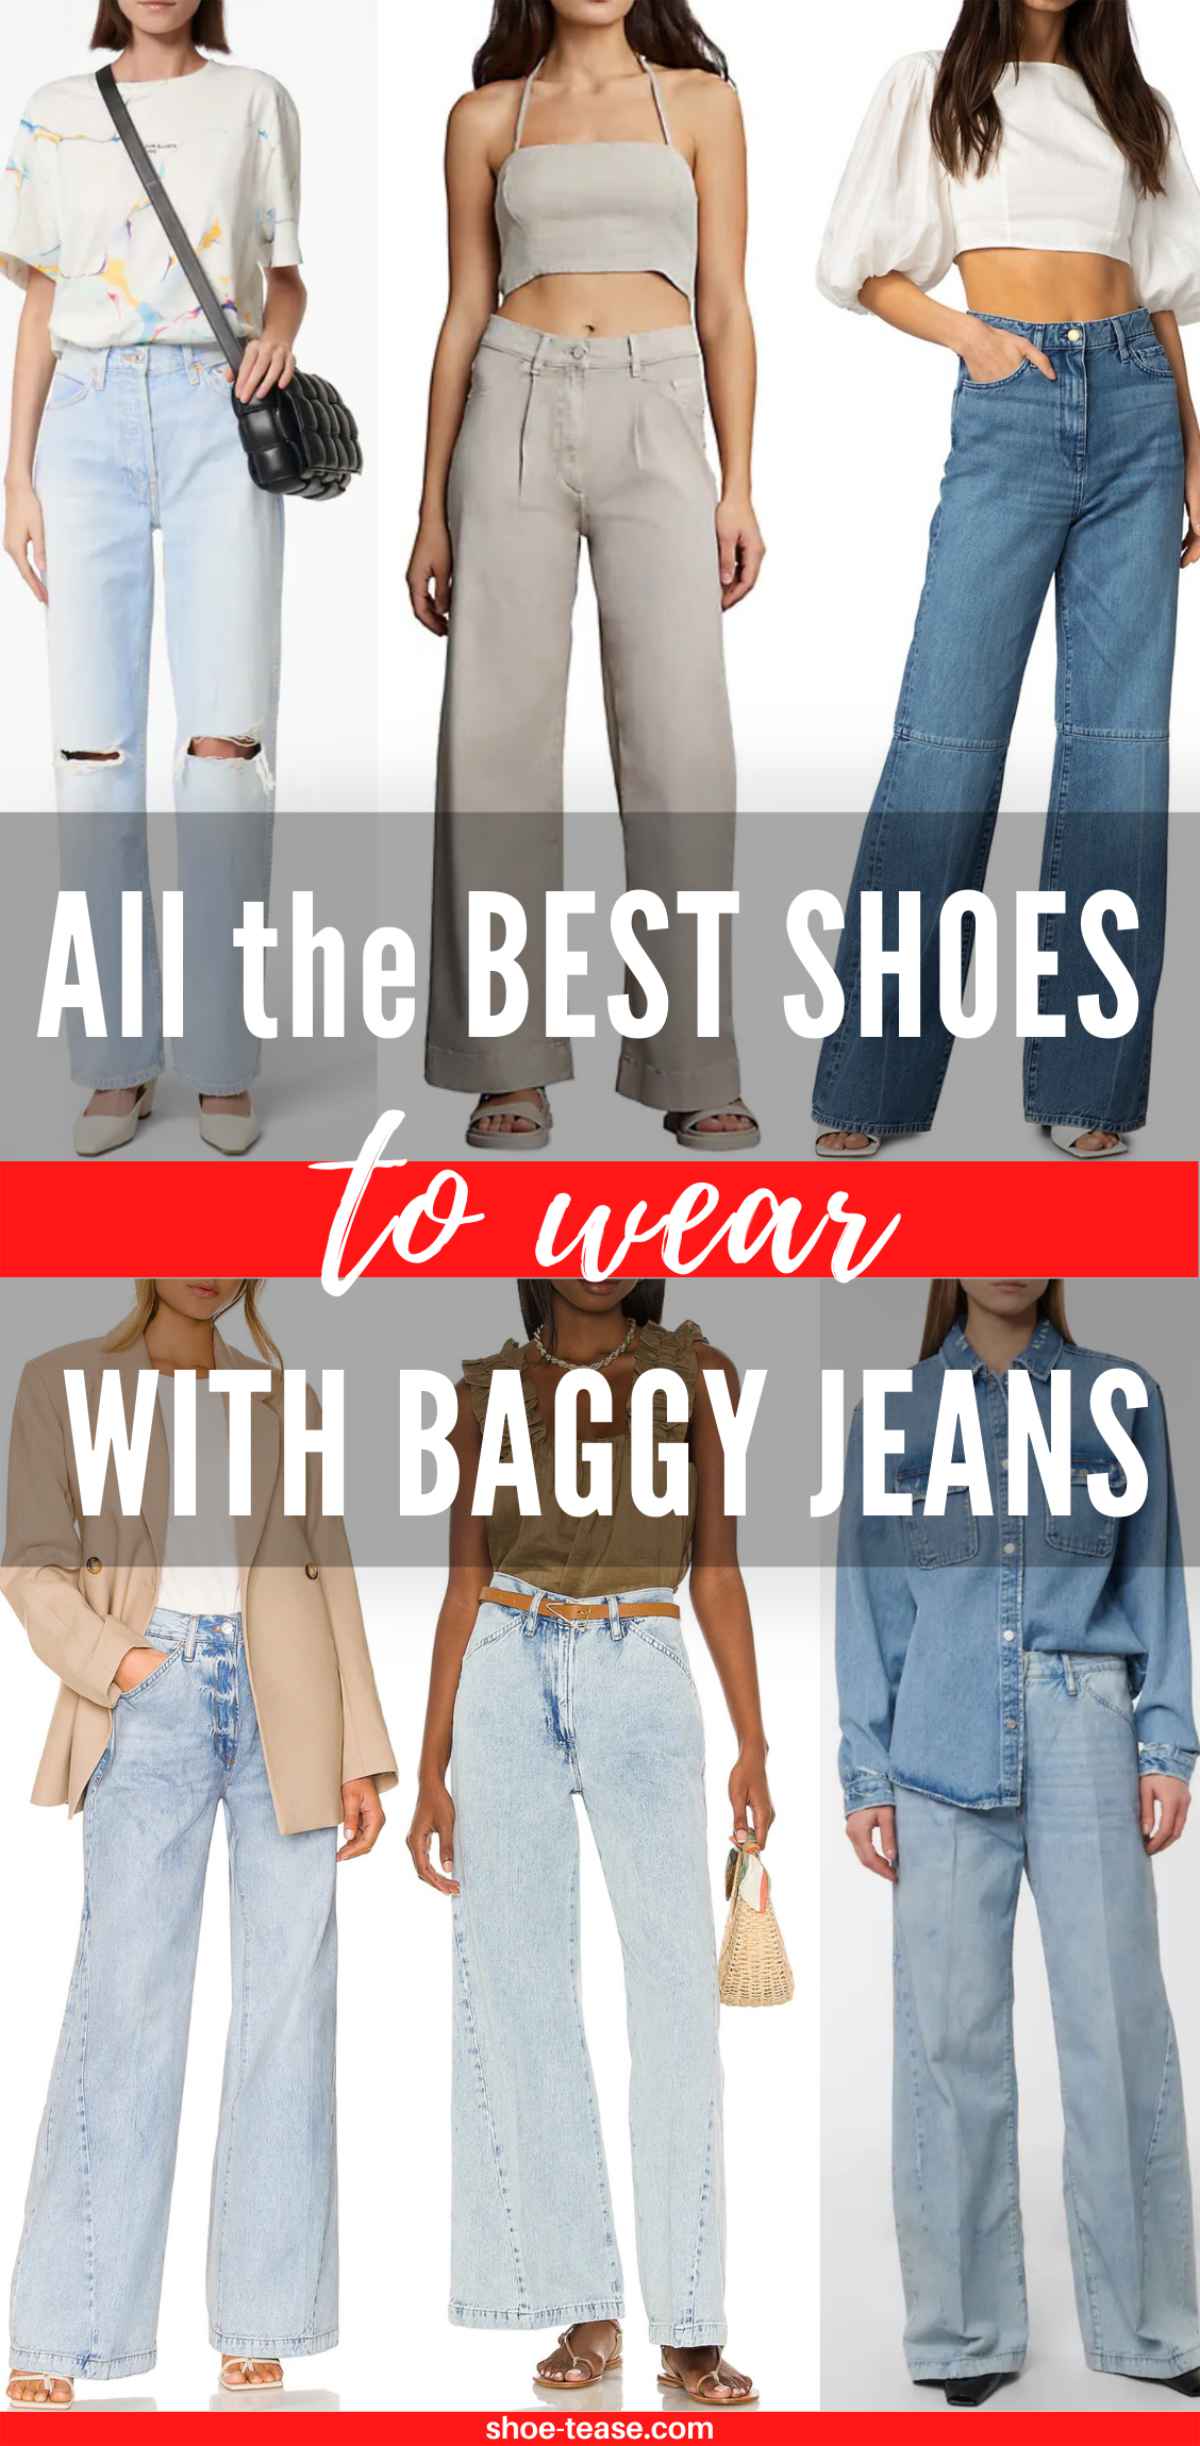 Text reading all the best shoes to wear with jogger over cropped view of 6 women wearing different baggy jeans outfits.